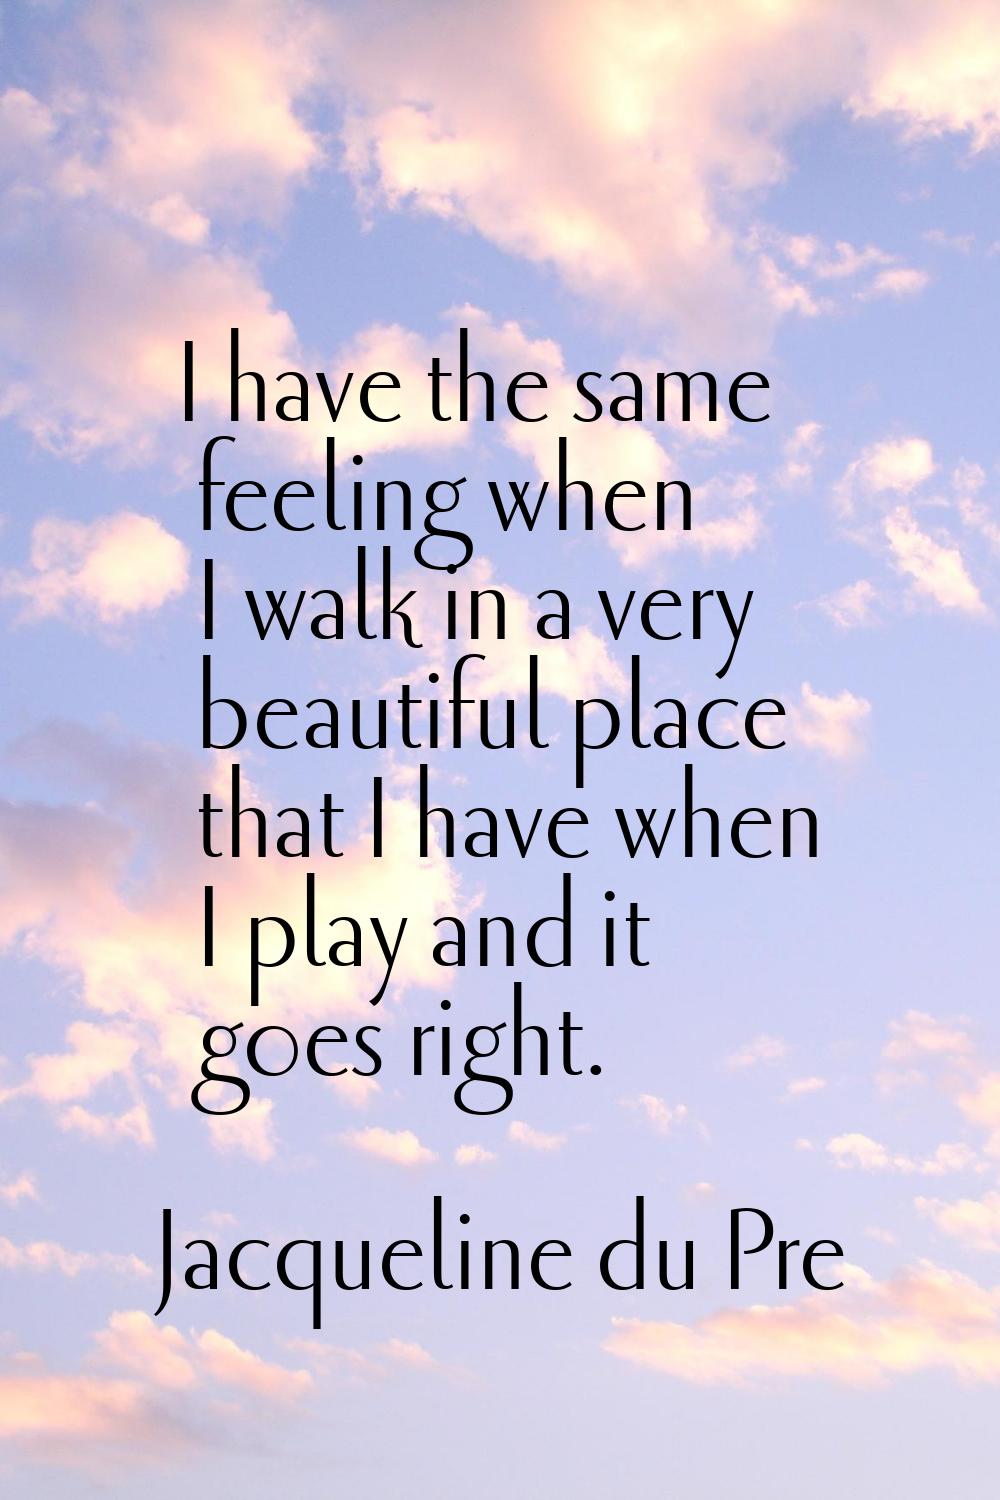 I have the same feeling when I walk in a very beautiful place that I have when I play and it goes r